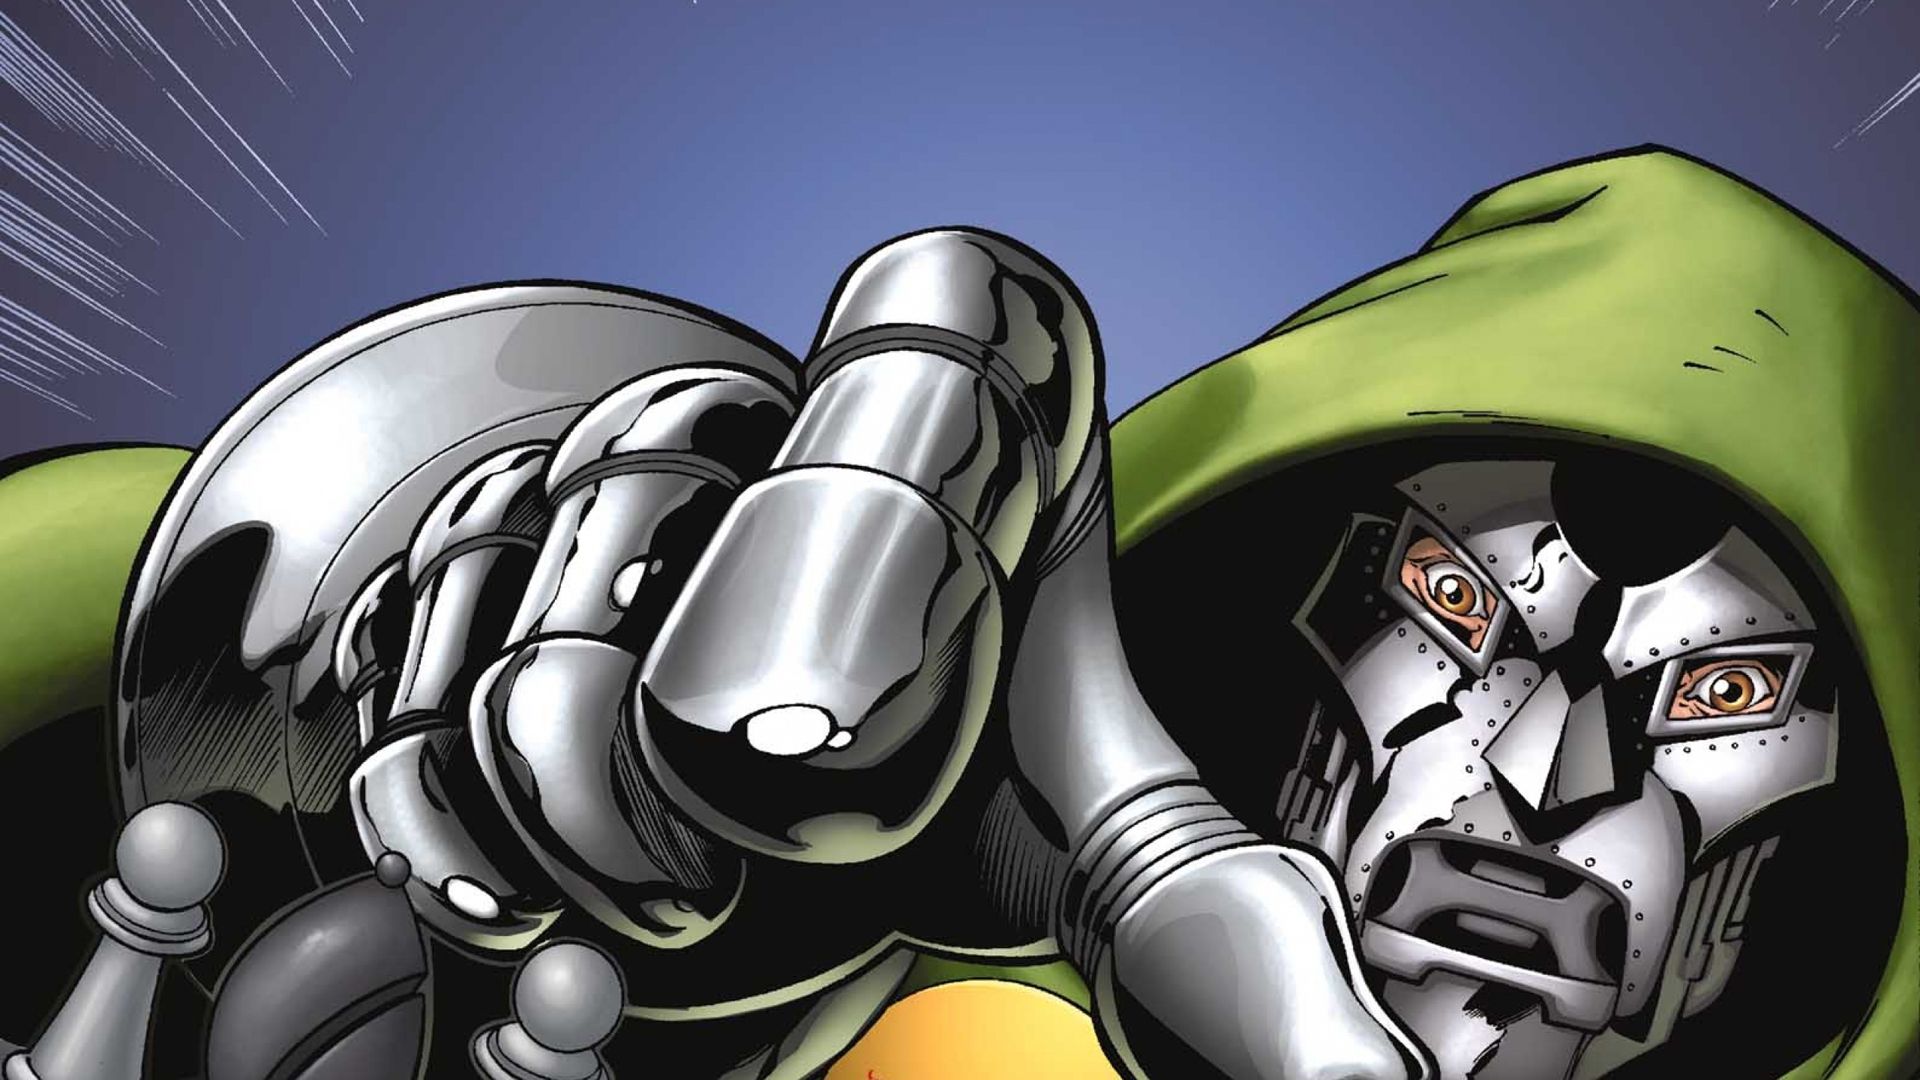 Body By Doom: 20 Weird Secrets About Dr. Doom's Body And Armor